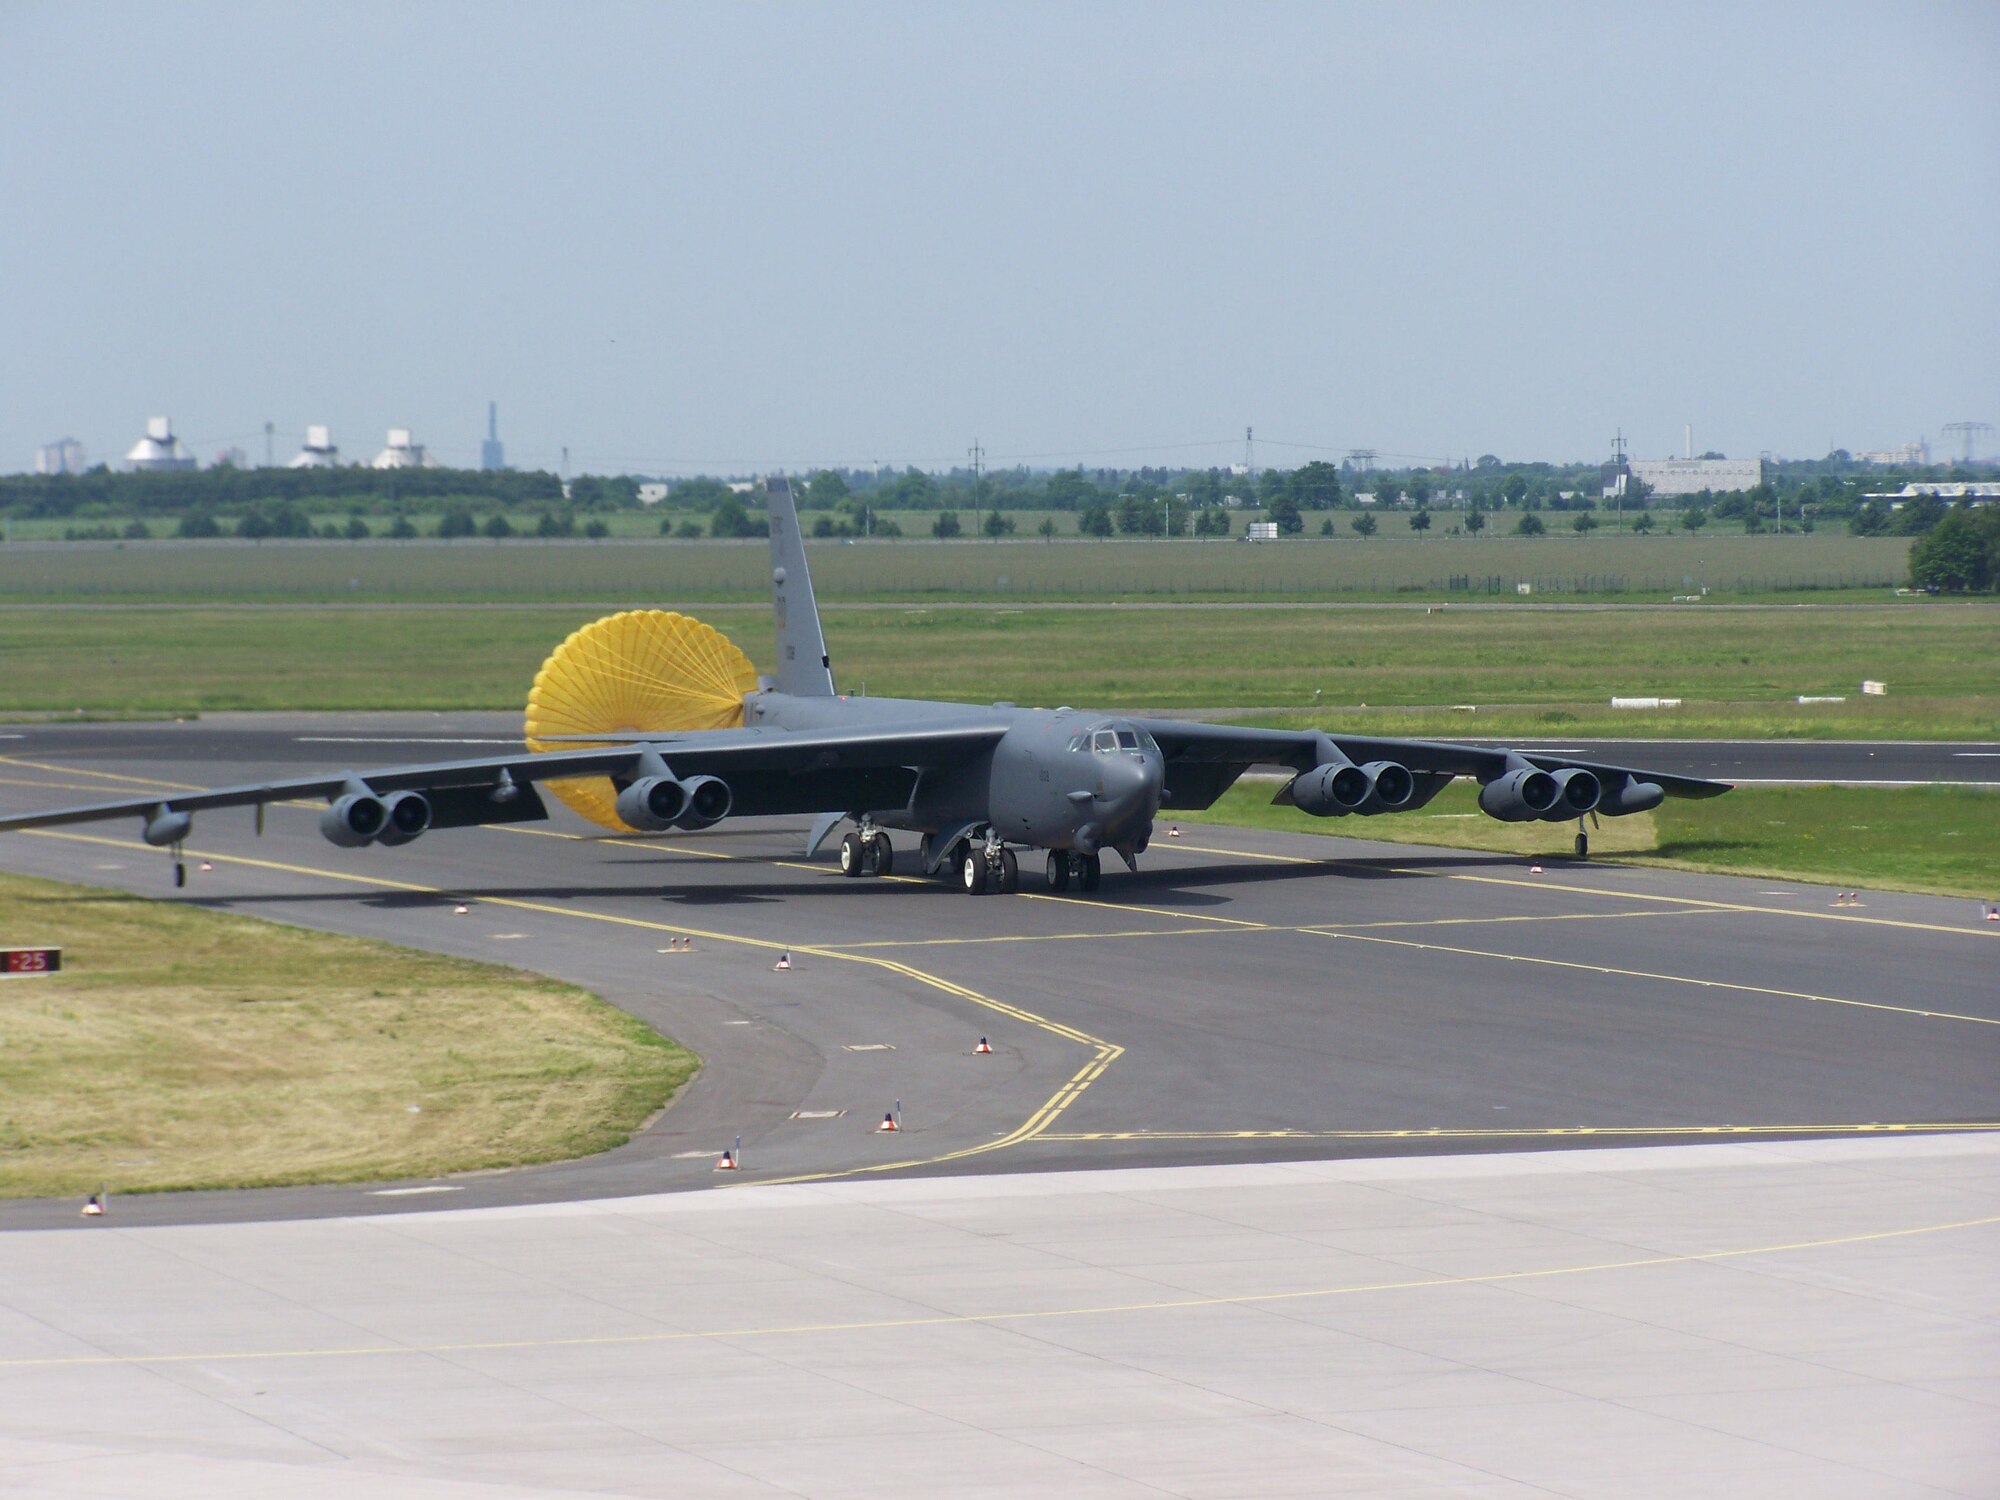 A B-52H Stratofortress from the 93rd Bomb Squadron, Barksdale Air Force Base, La., lands in Berlin for the annual Berlin Air Show June 8-13, 2010. Air Force Reserve Command officials say this is the first time a B-52 from the 917th Wing has taken part in the international event. (Courtesy photo)

